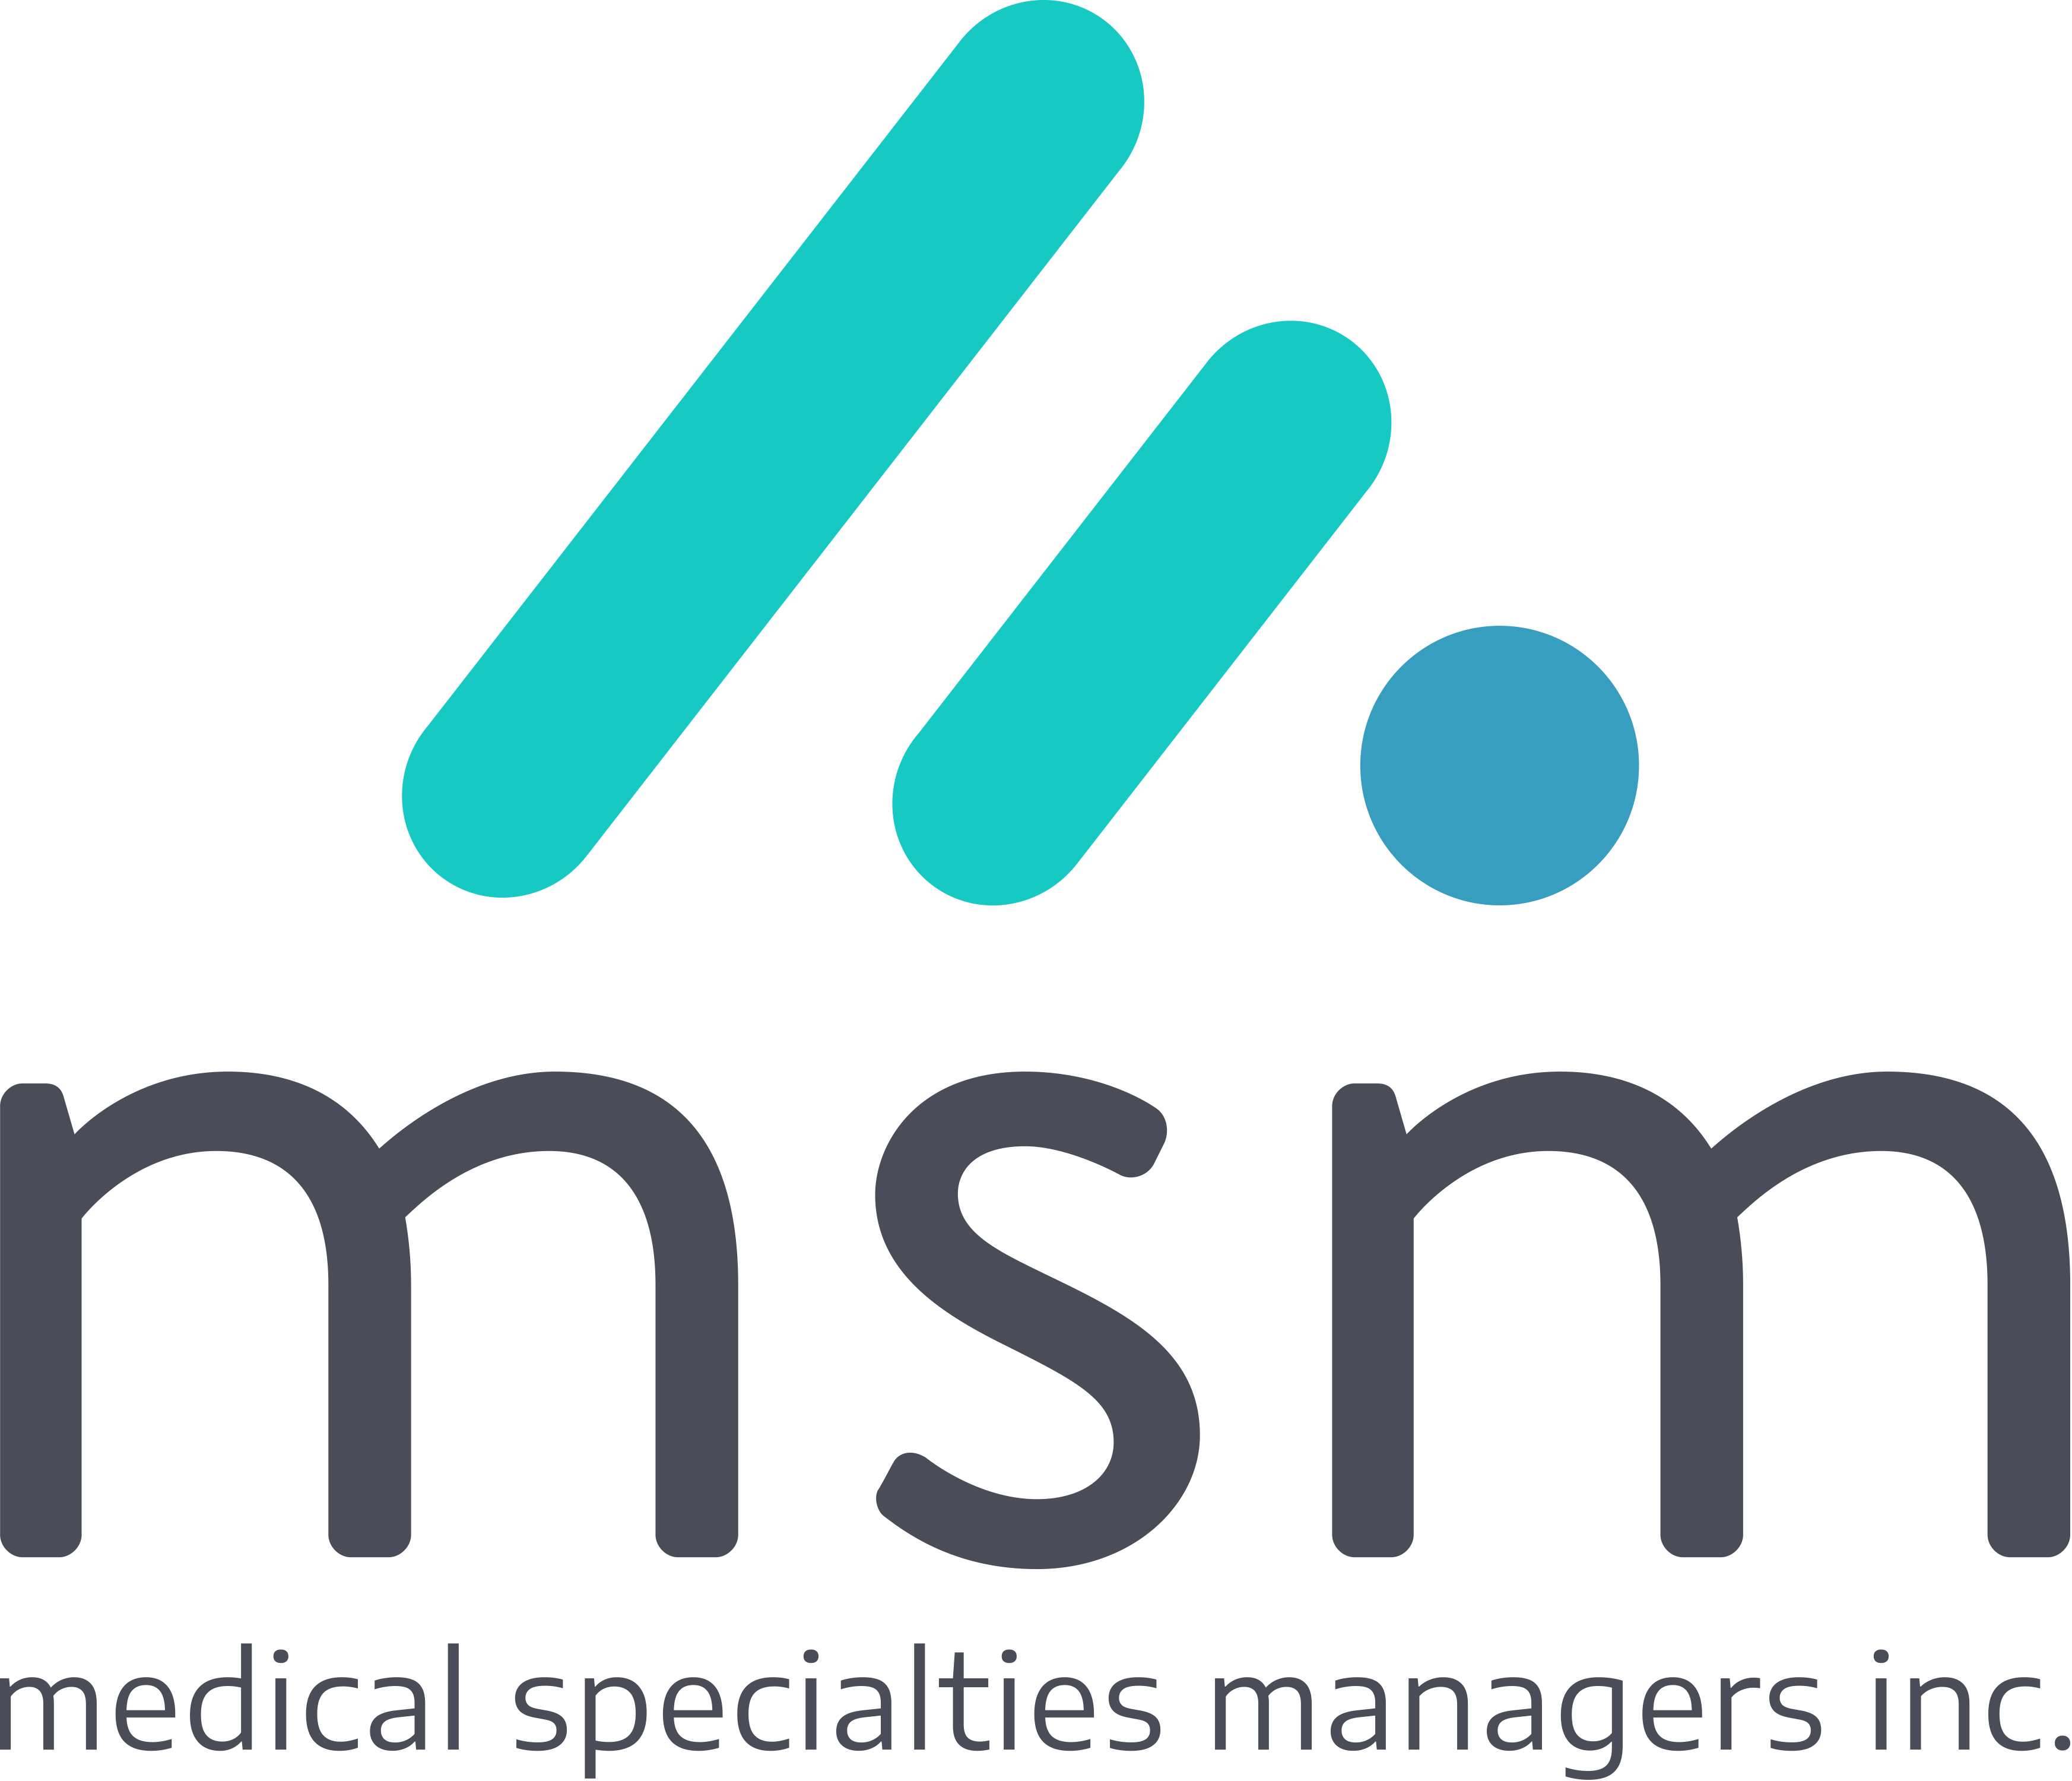 Medical Specialties Managers, Inc. logo